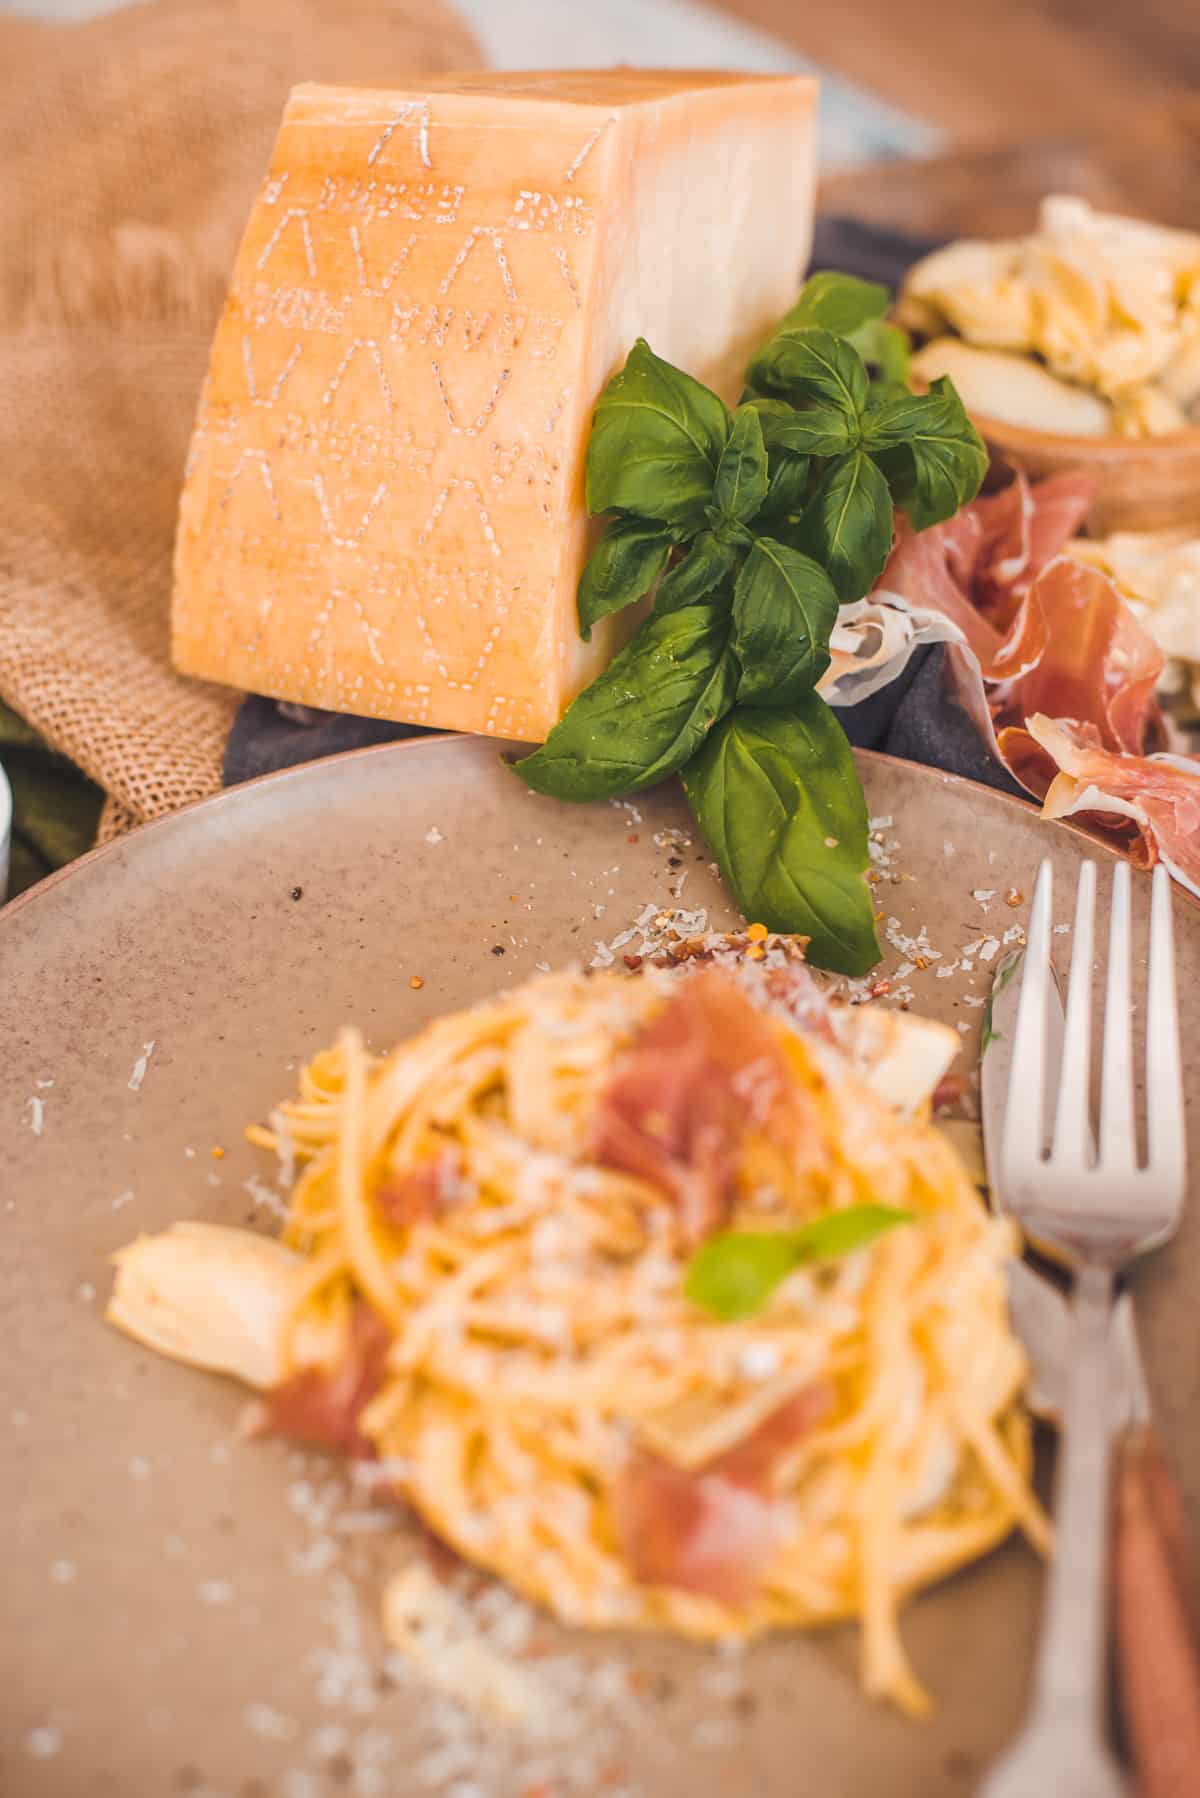 Serviced Carbonara and Grana Padano Cheese in a Table